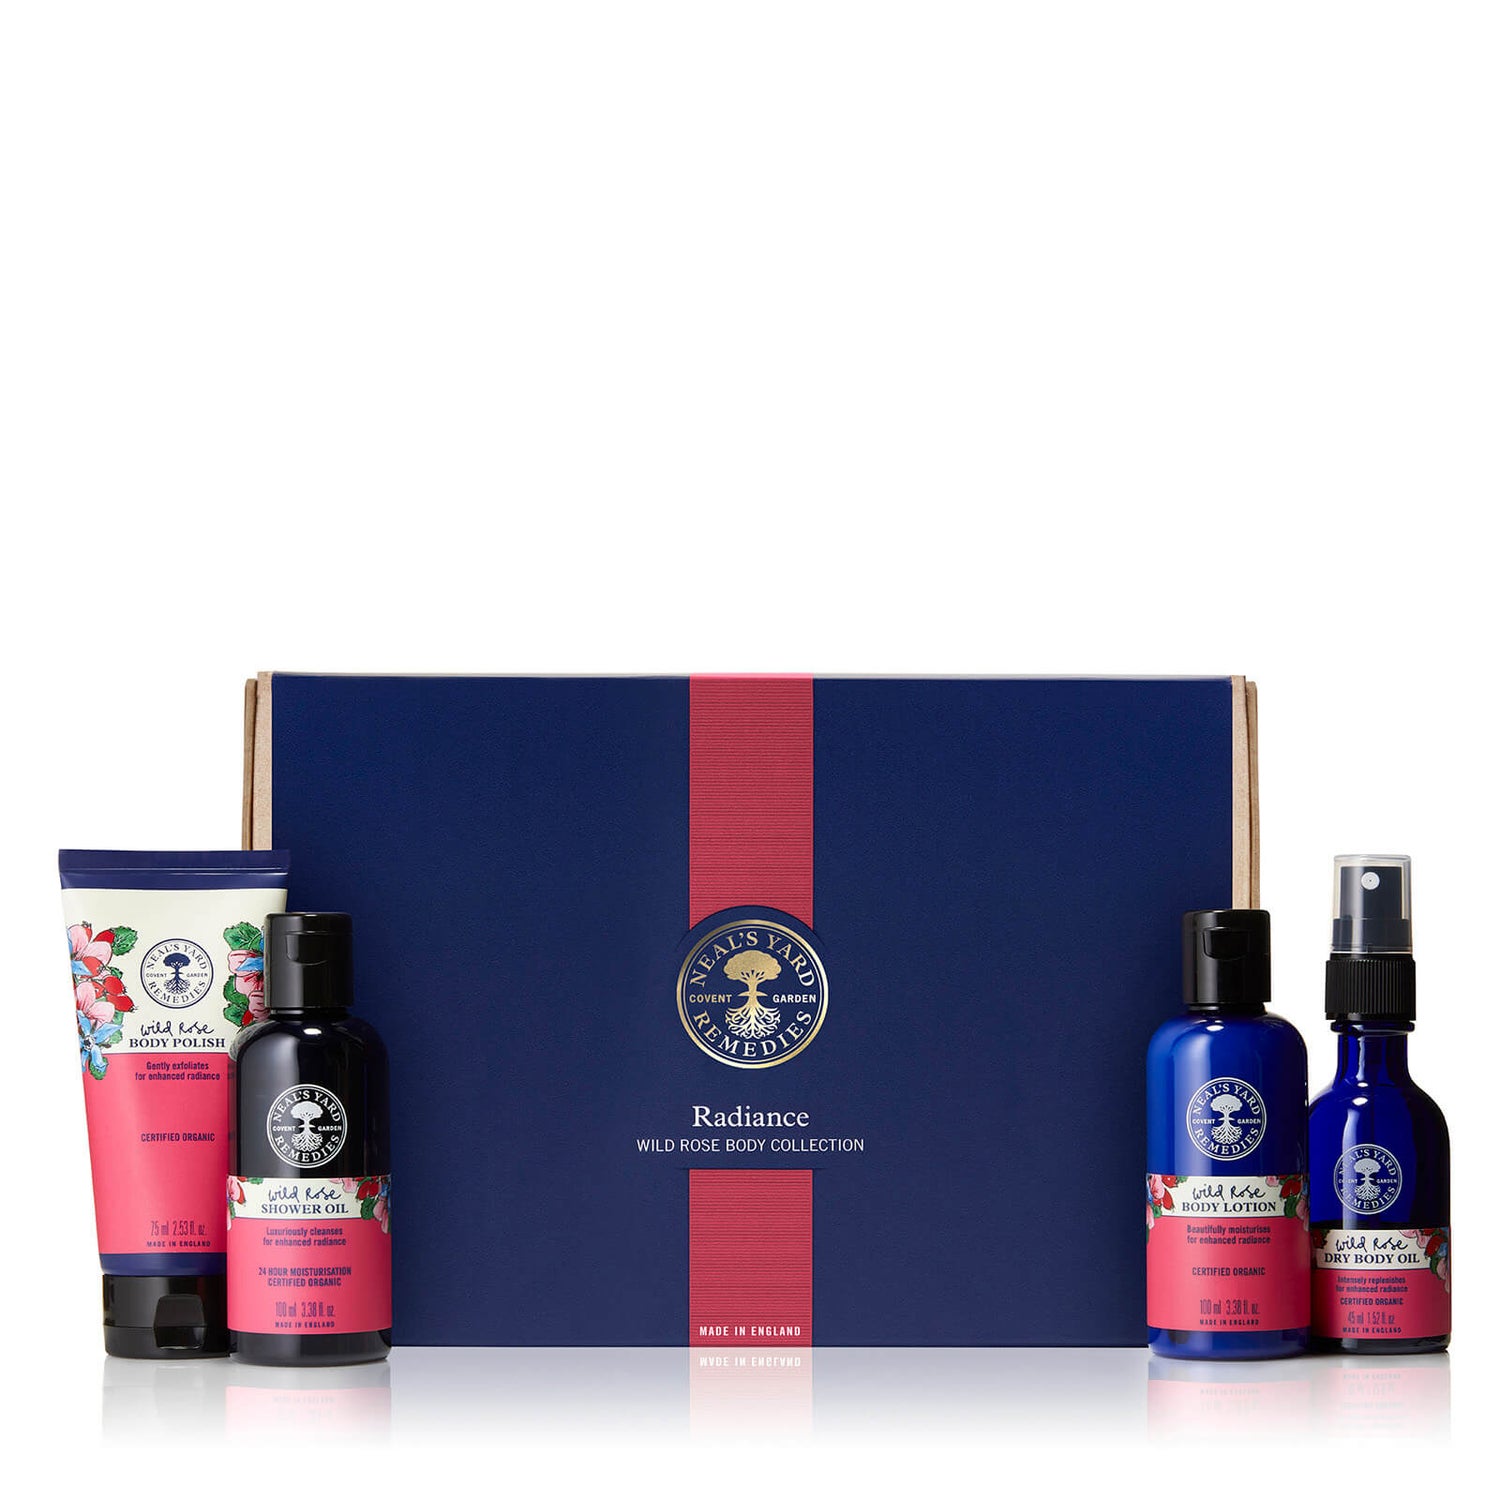 Neal's Yard Remedies Radiance Wild Rose Body Collection (Worth £50.00)